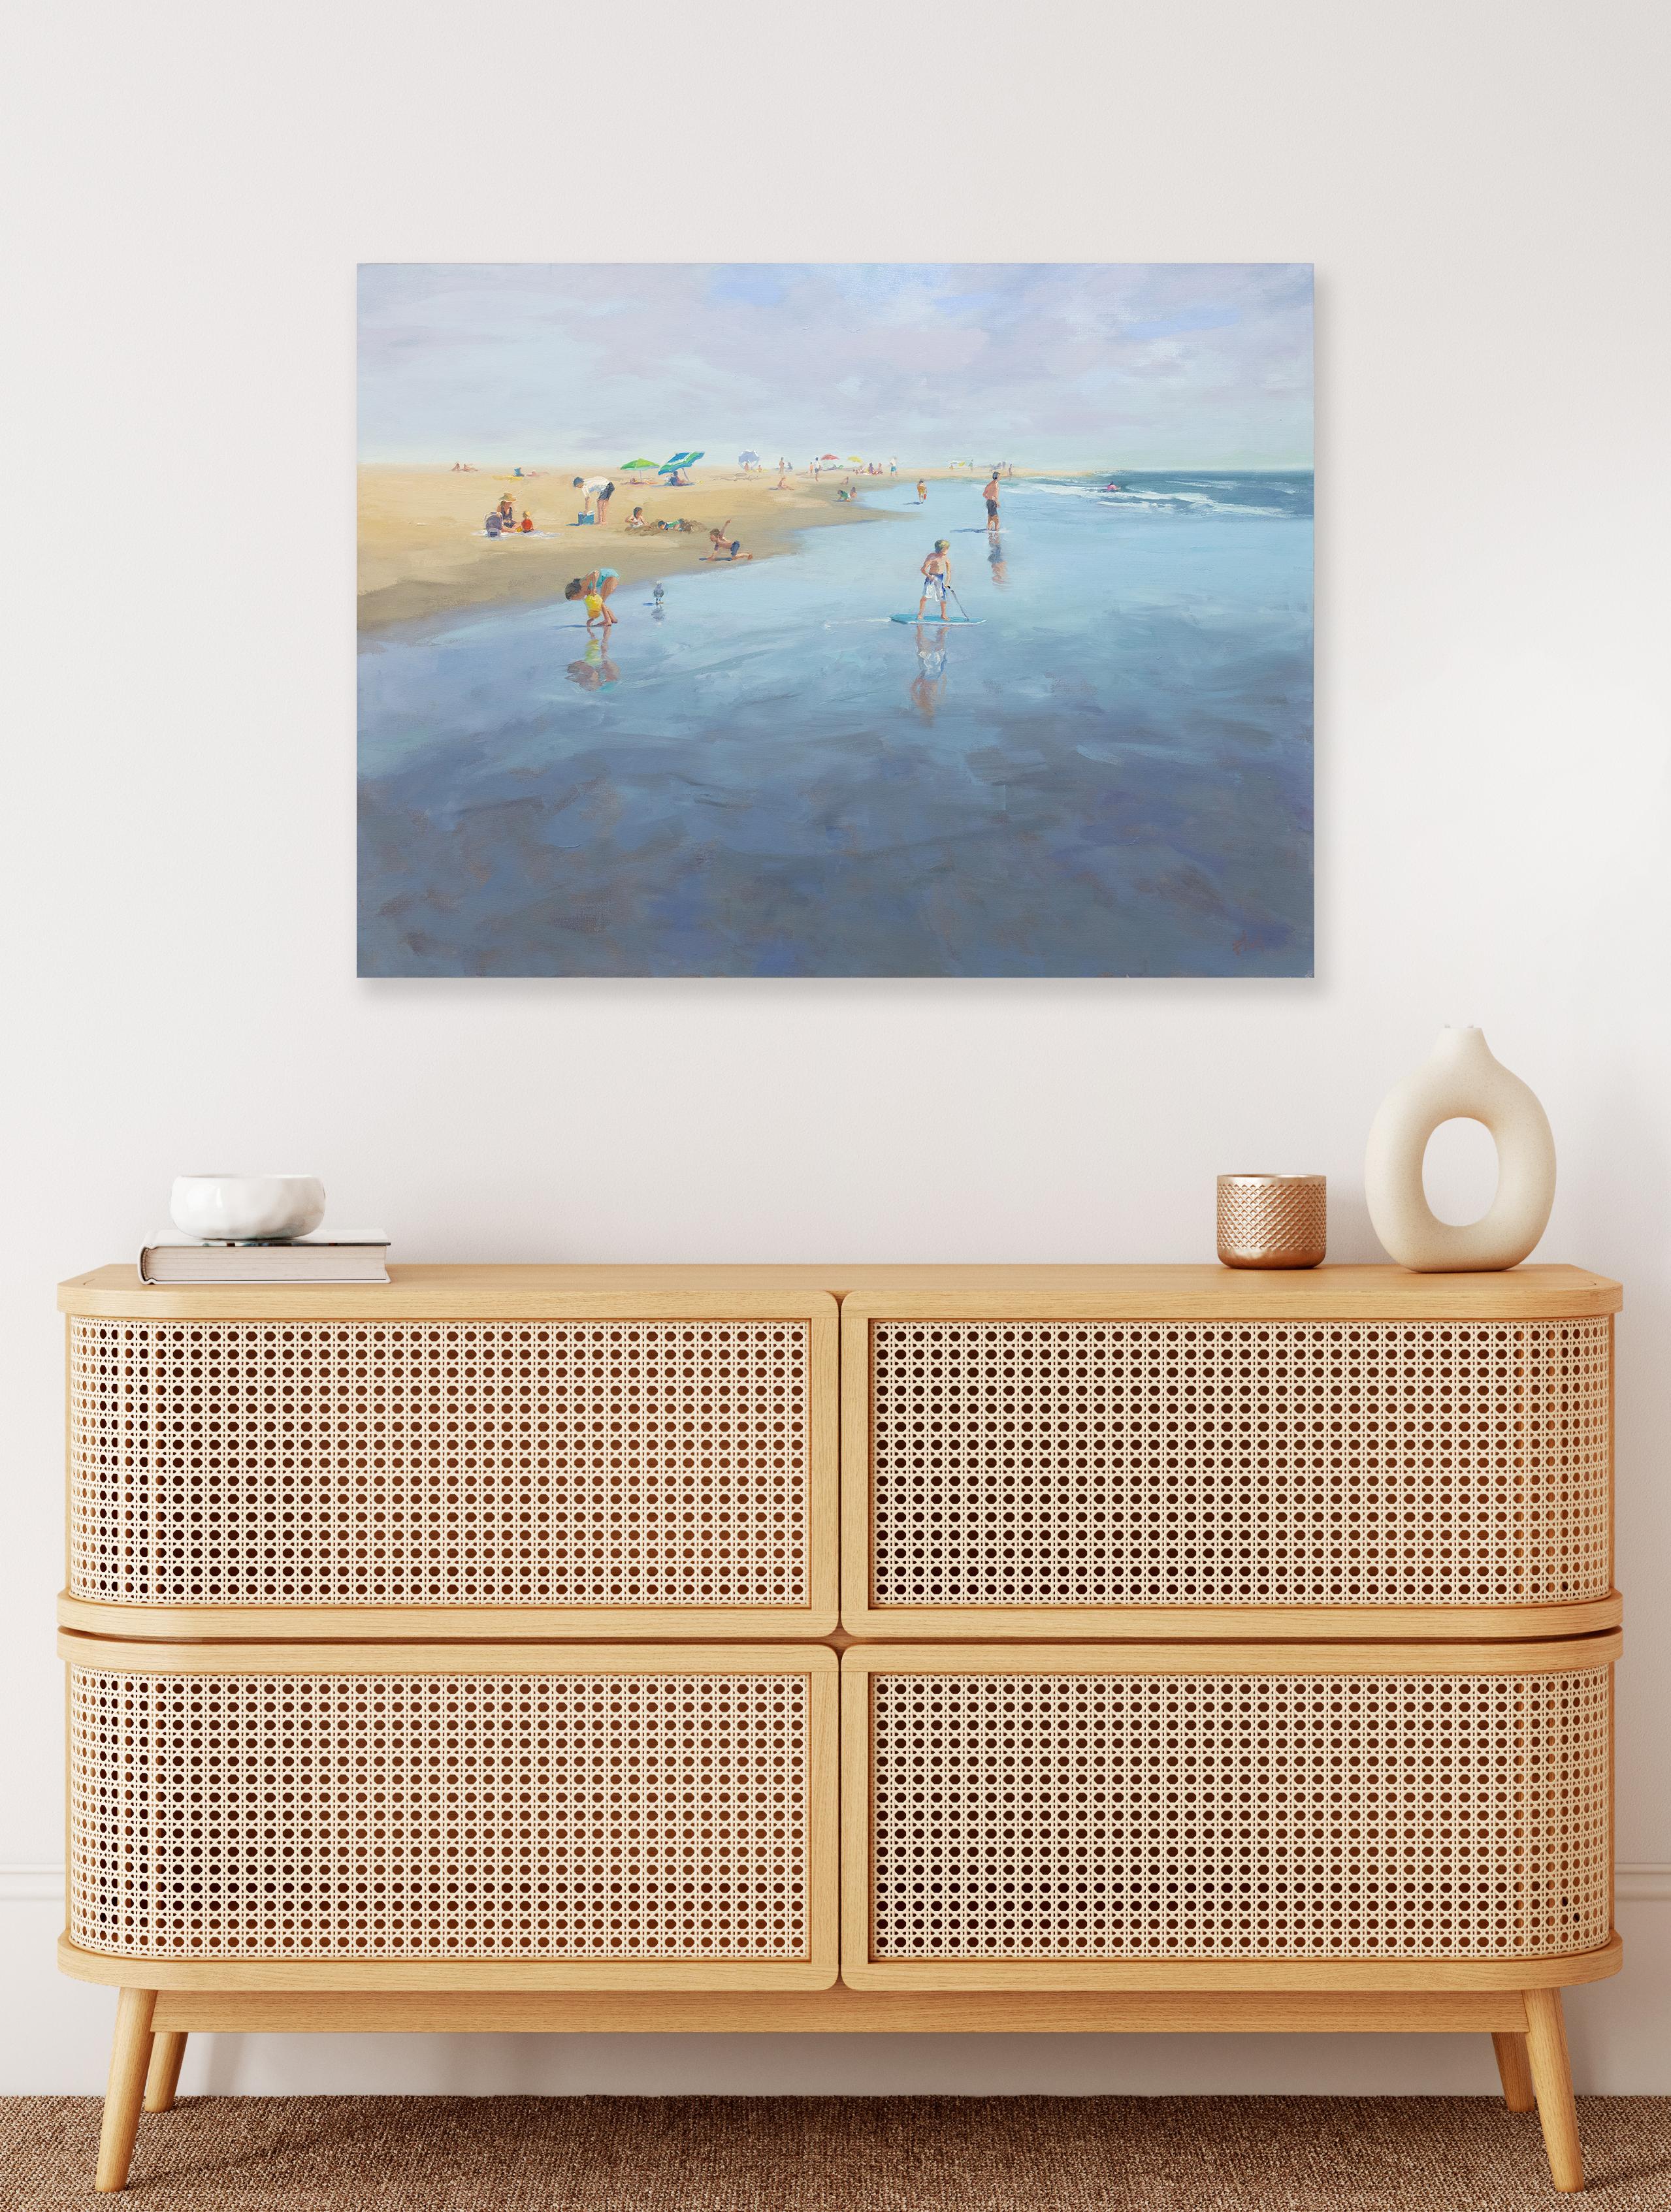 This coastal landscape paintings captures beach-goers lounging and playing along a shoreline, and features a cool palette and loose, painterly style. The painting is made with oil paint on gallery wrapped canvas, and has neutral painted sides. It is